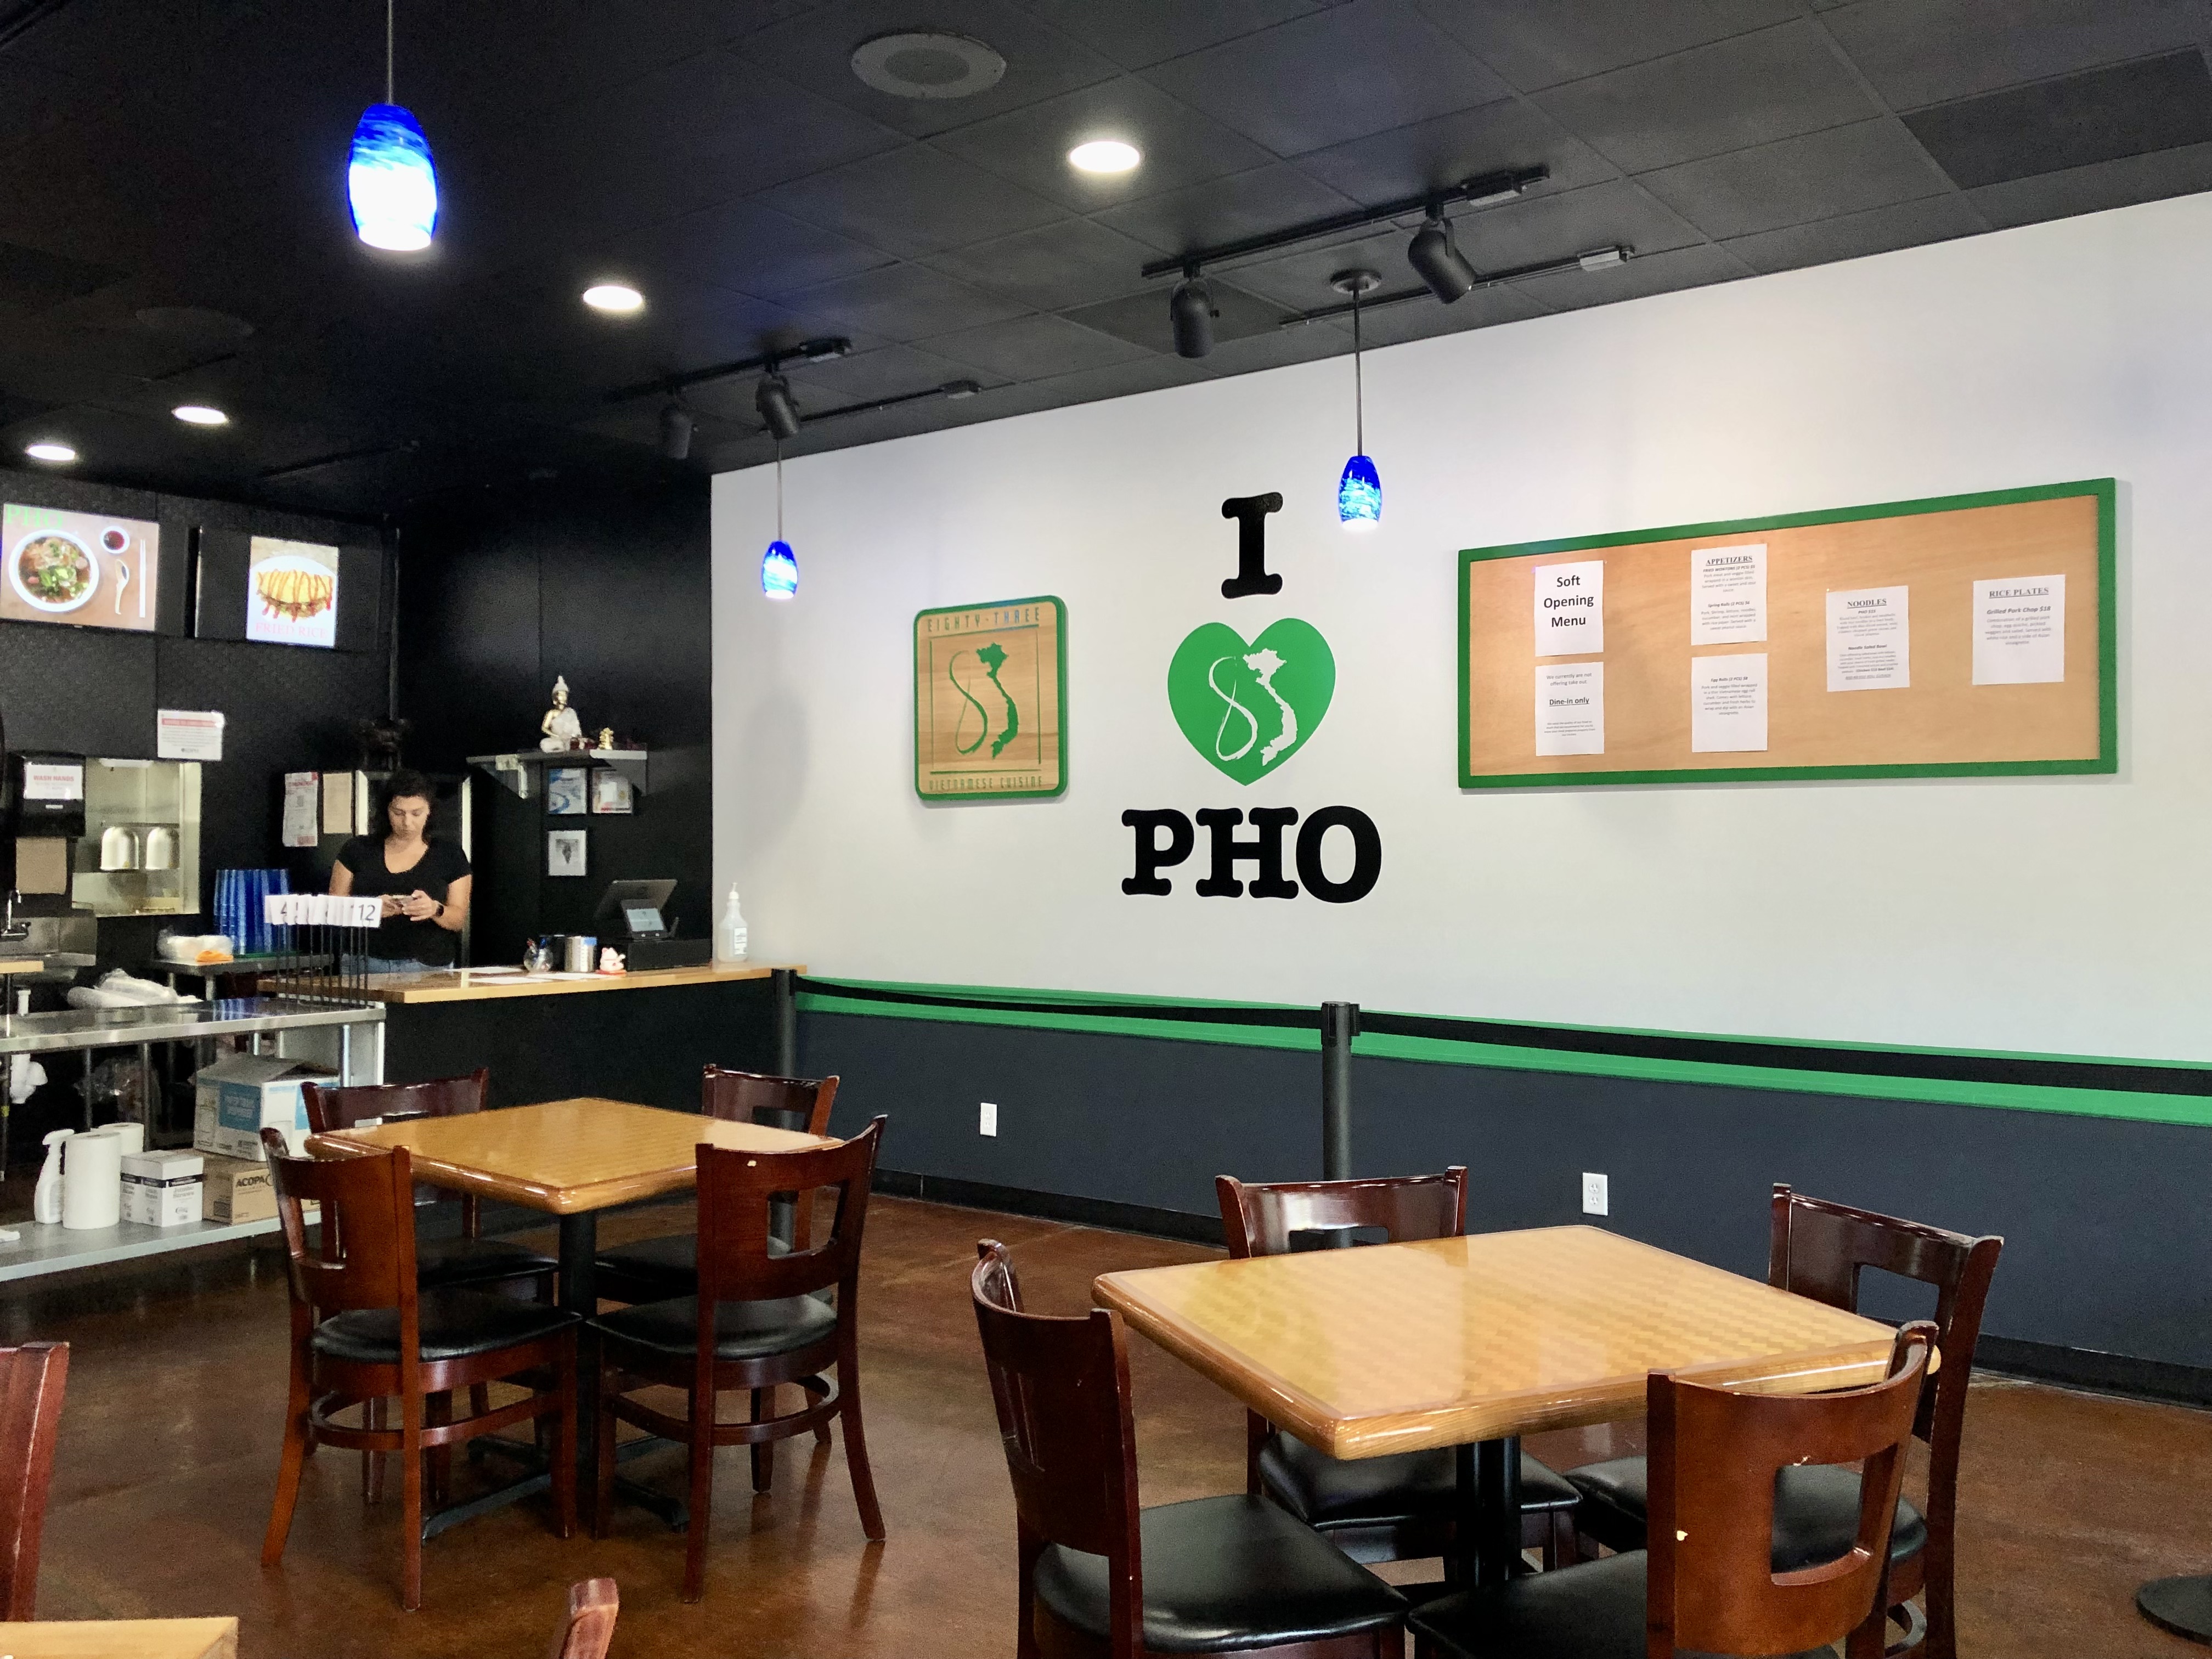 Inside 83 Vietnamese Cuisine, there is a white wall with 